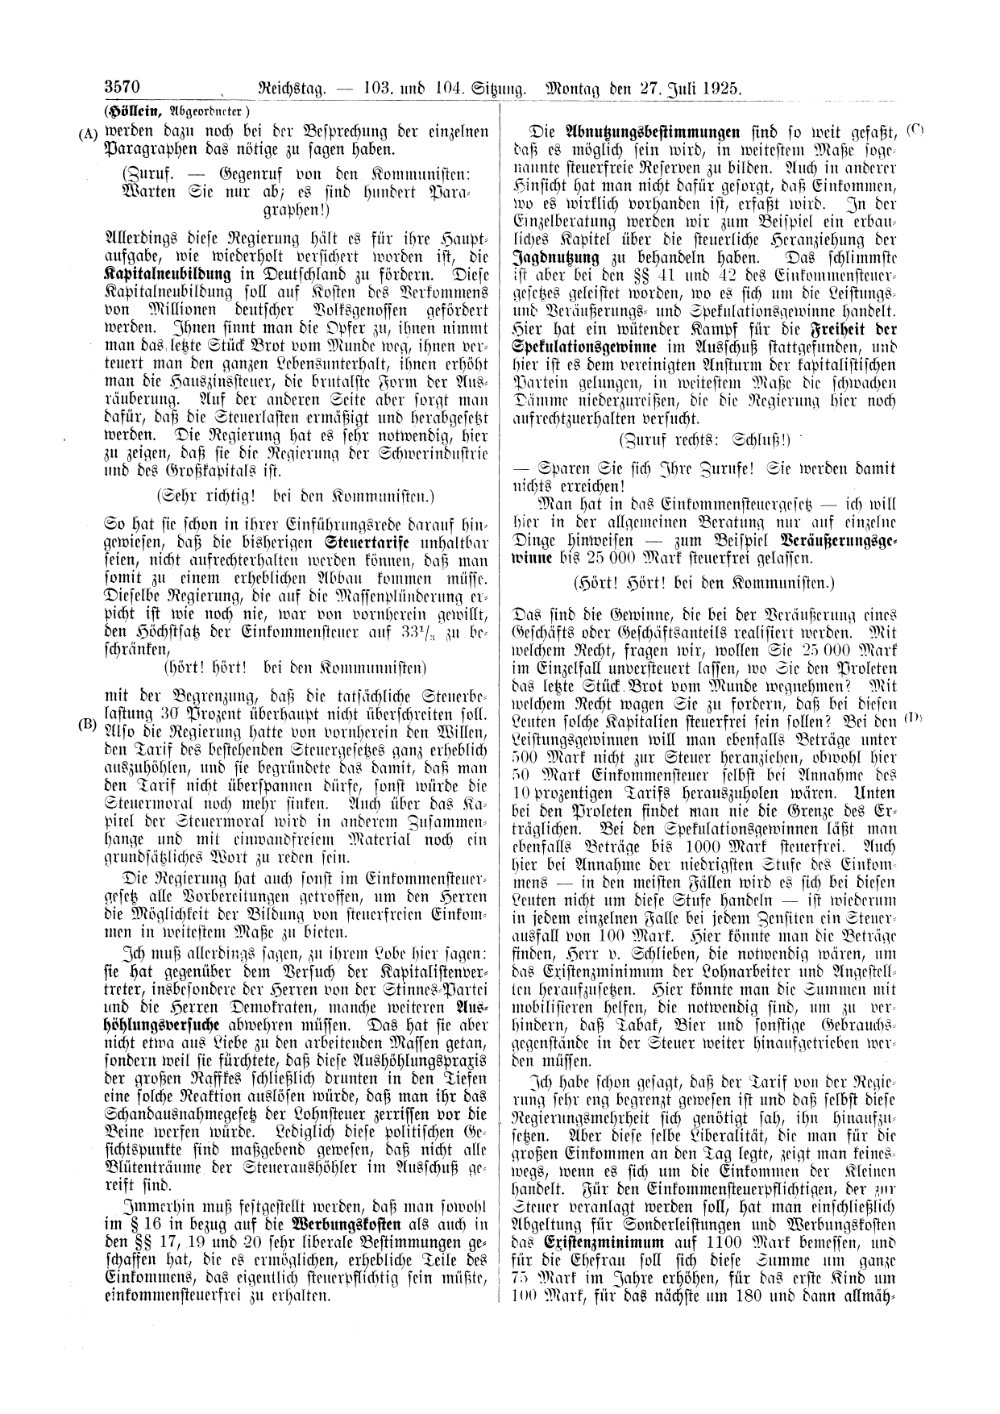 Scan of page 3570